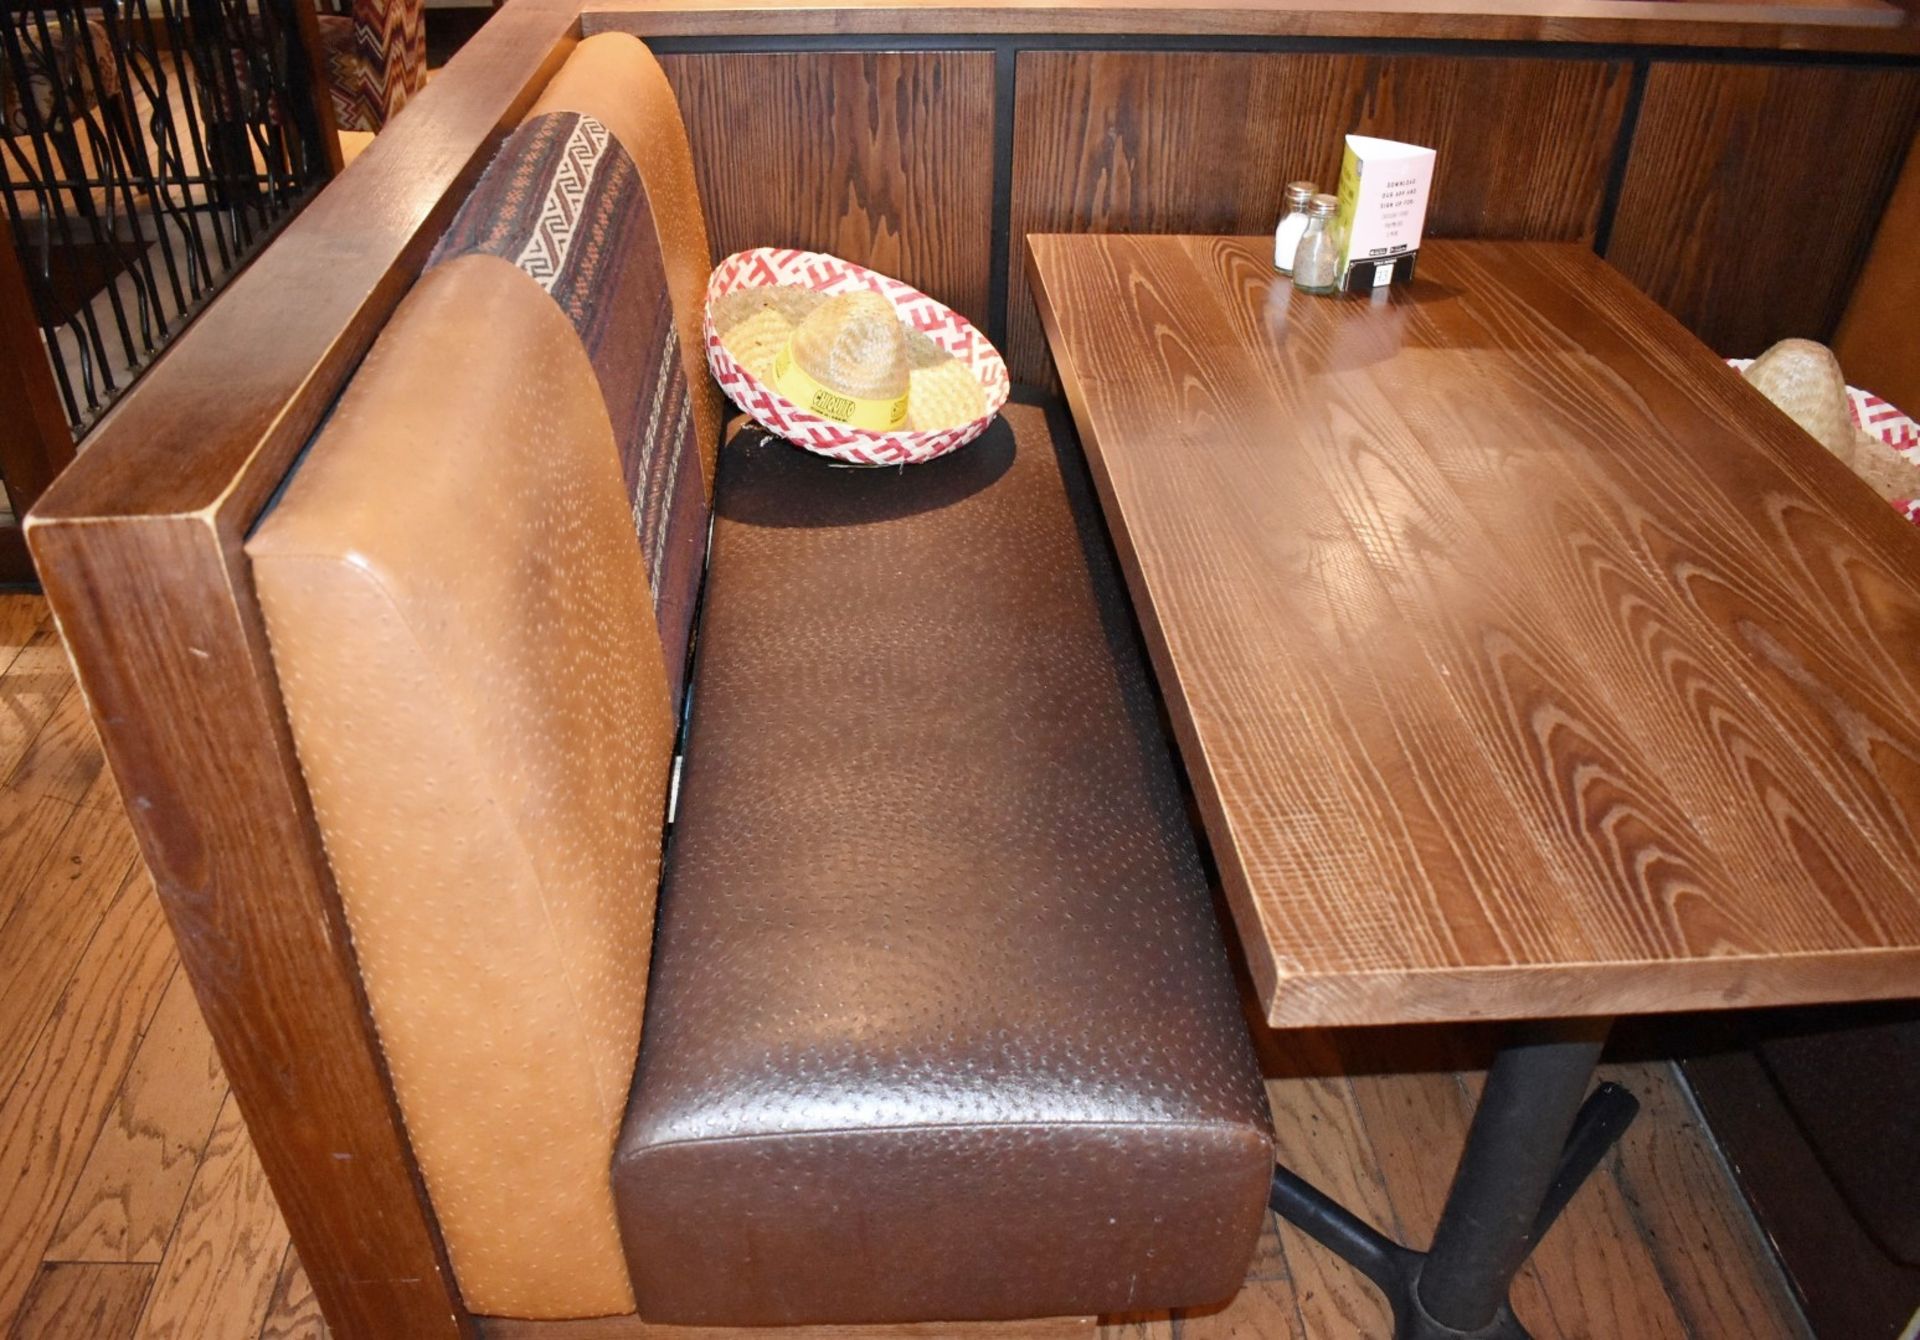 15-Pieces Of Restaurant Booth Seating Of Varying Length - Image 16 of 22